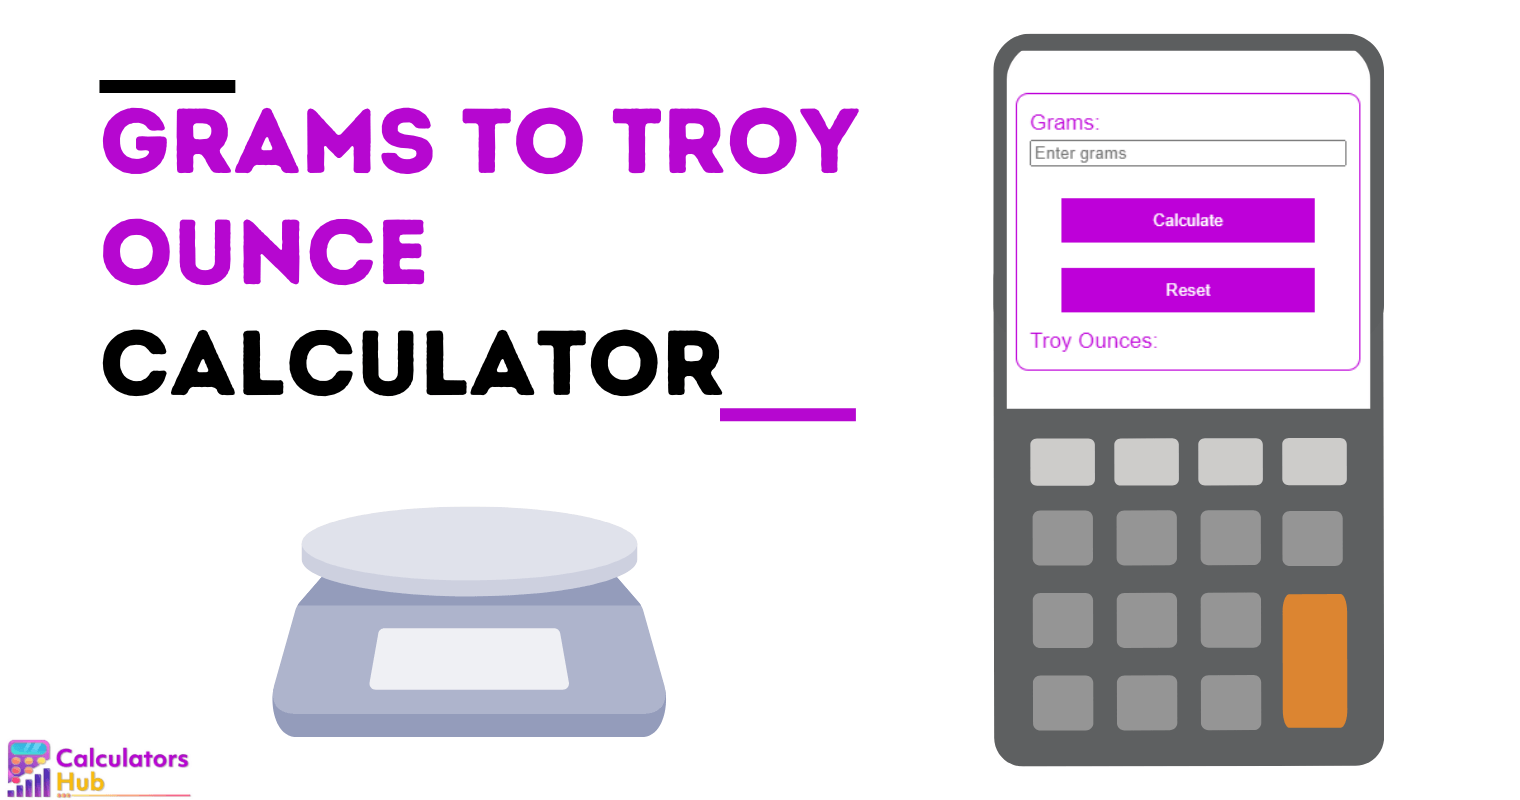 Grams to Troy Ounce Calculator